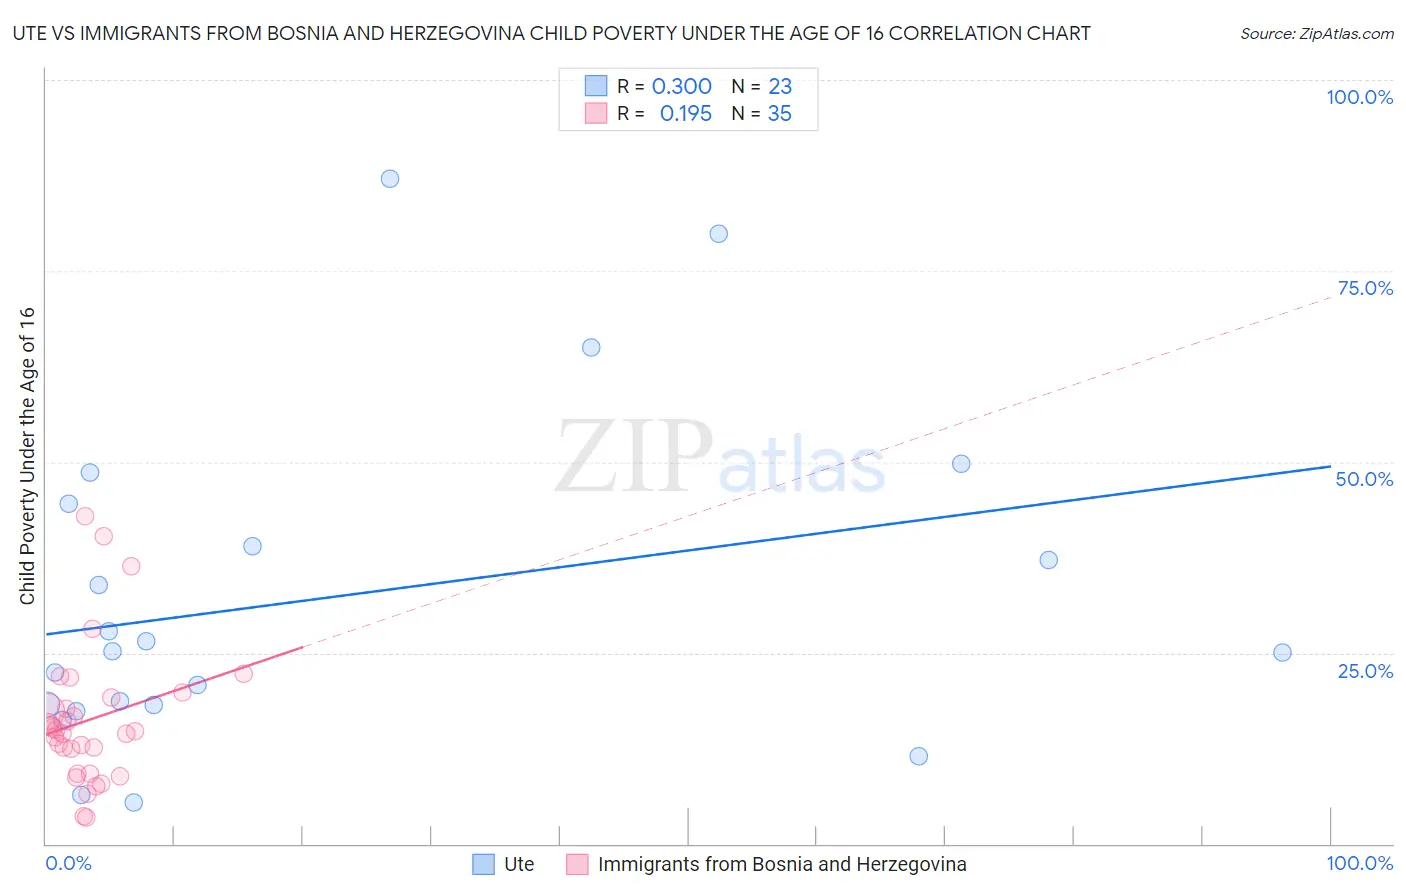 Ute vs Immigrants from Bosnia and Herzegovina Child Poverty Under the Age of 16